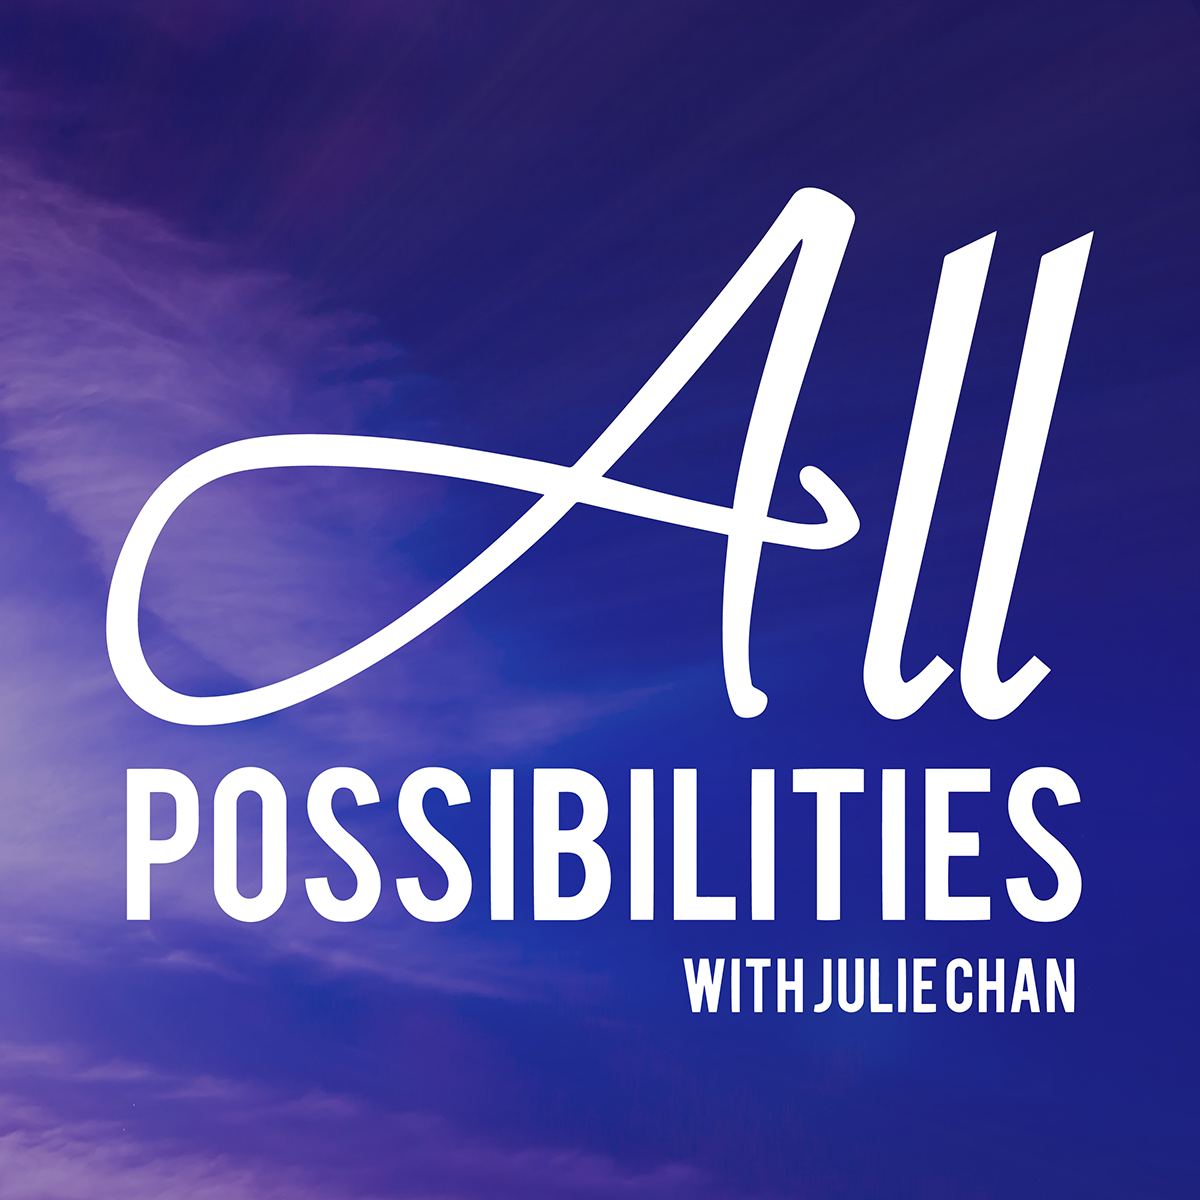 all-possibilities-logo-sq-1200px.png